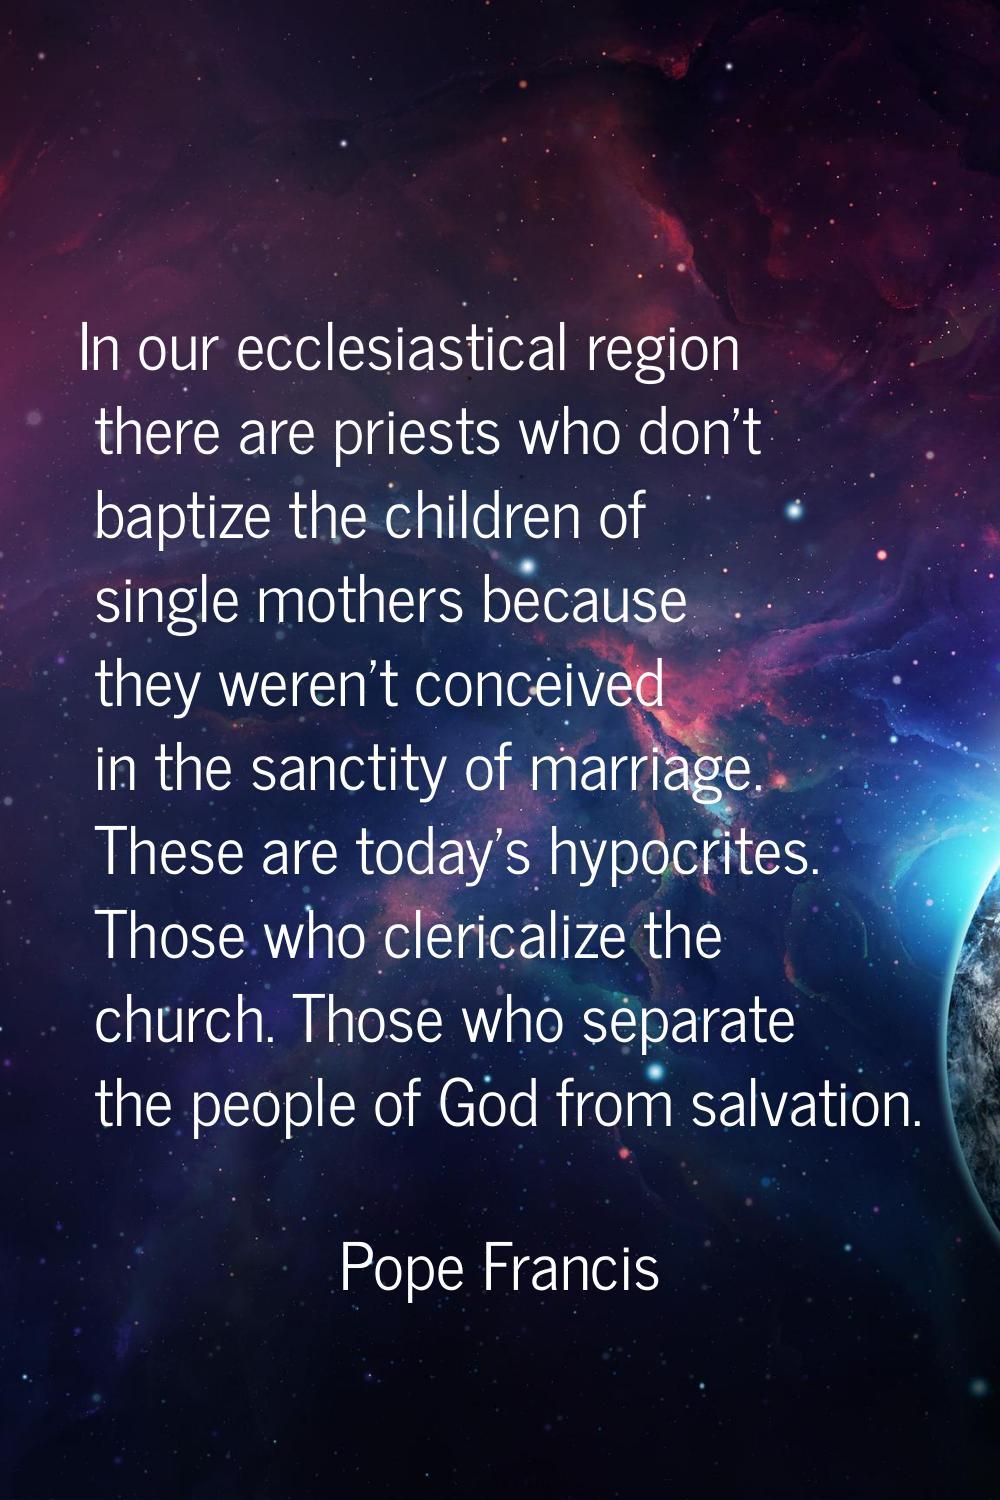 In our ecclesiastical region there are priests who don't baptize the children of single mothers bec